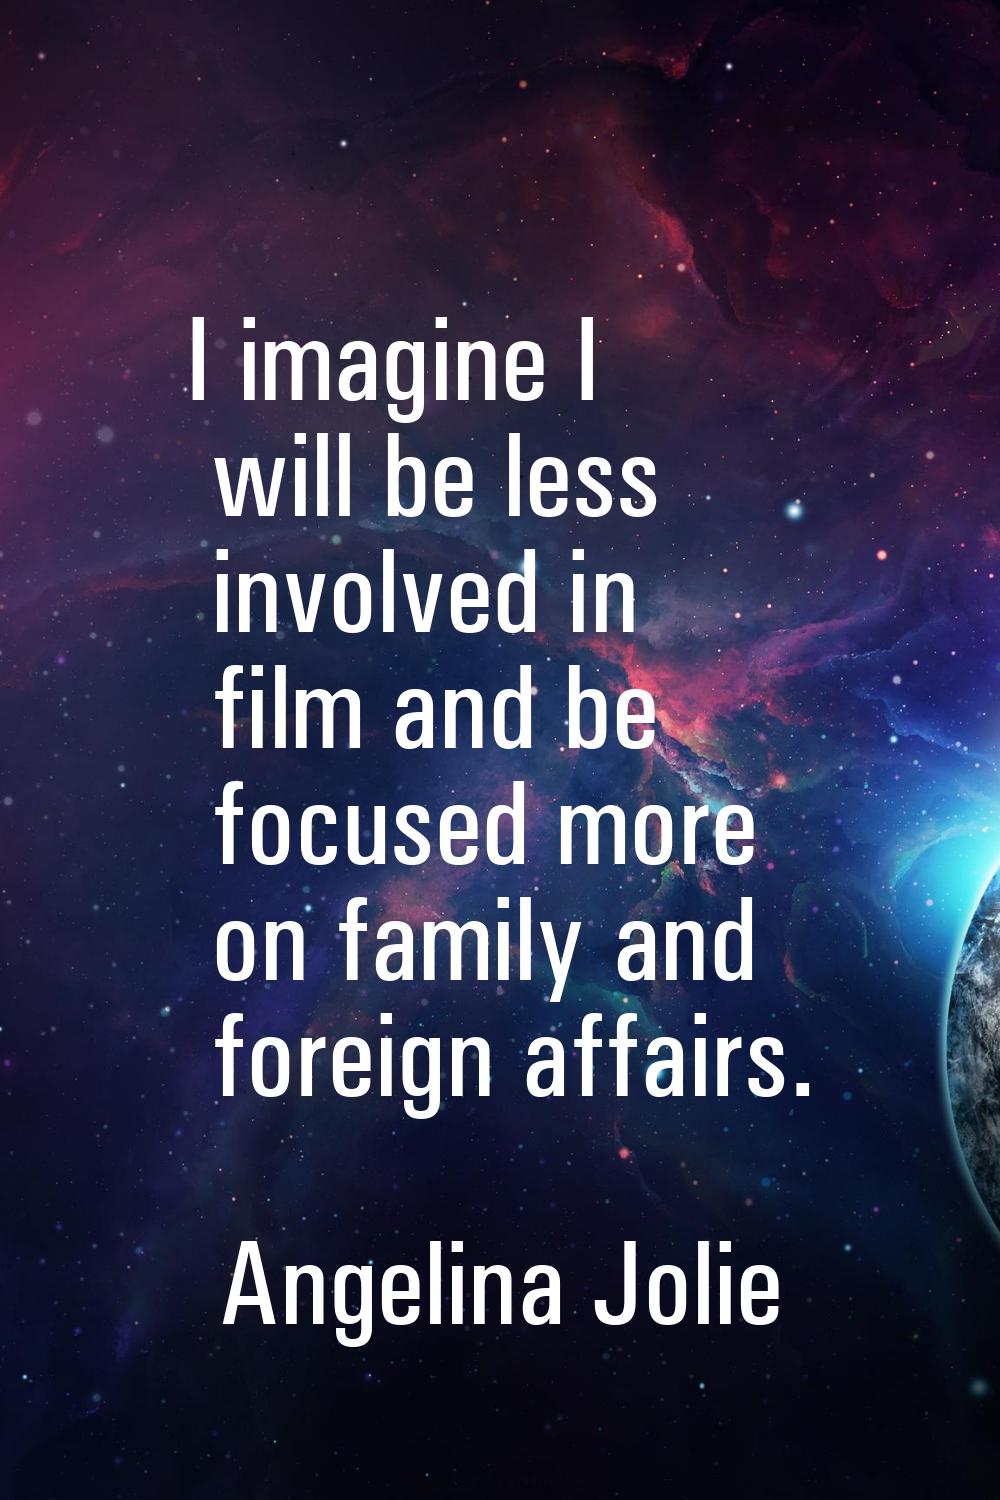 I imagine I will be less involved in film and be focused more on family and foreign affairs.